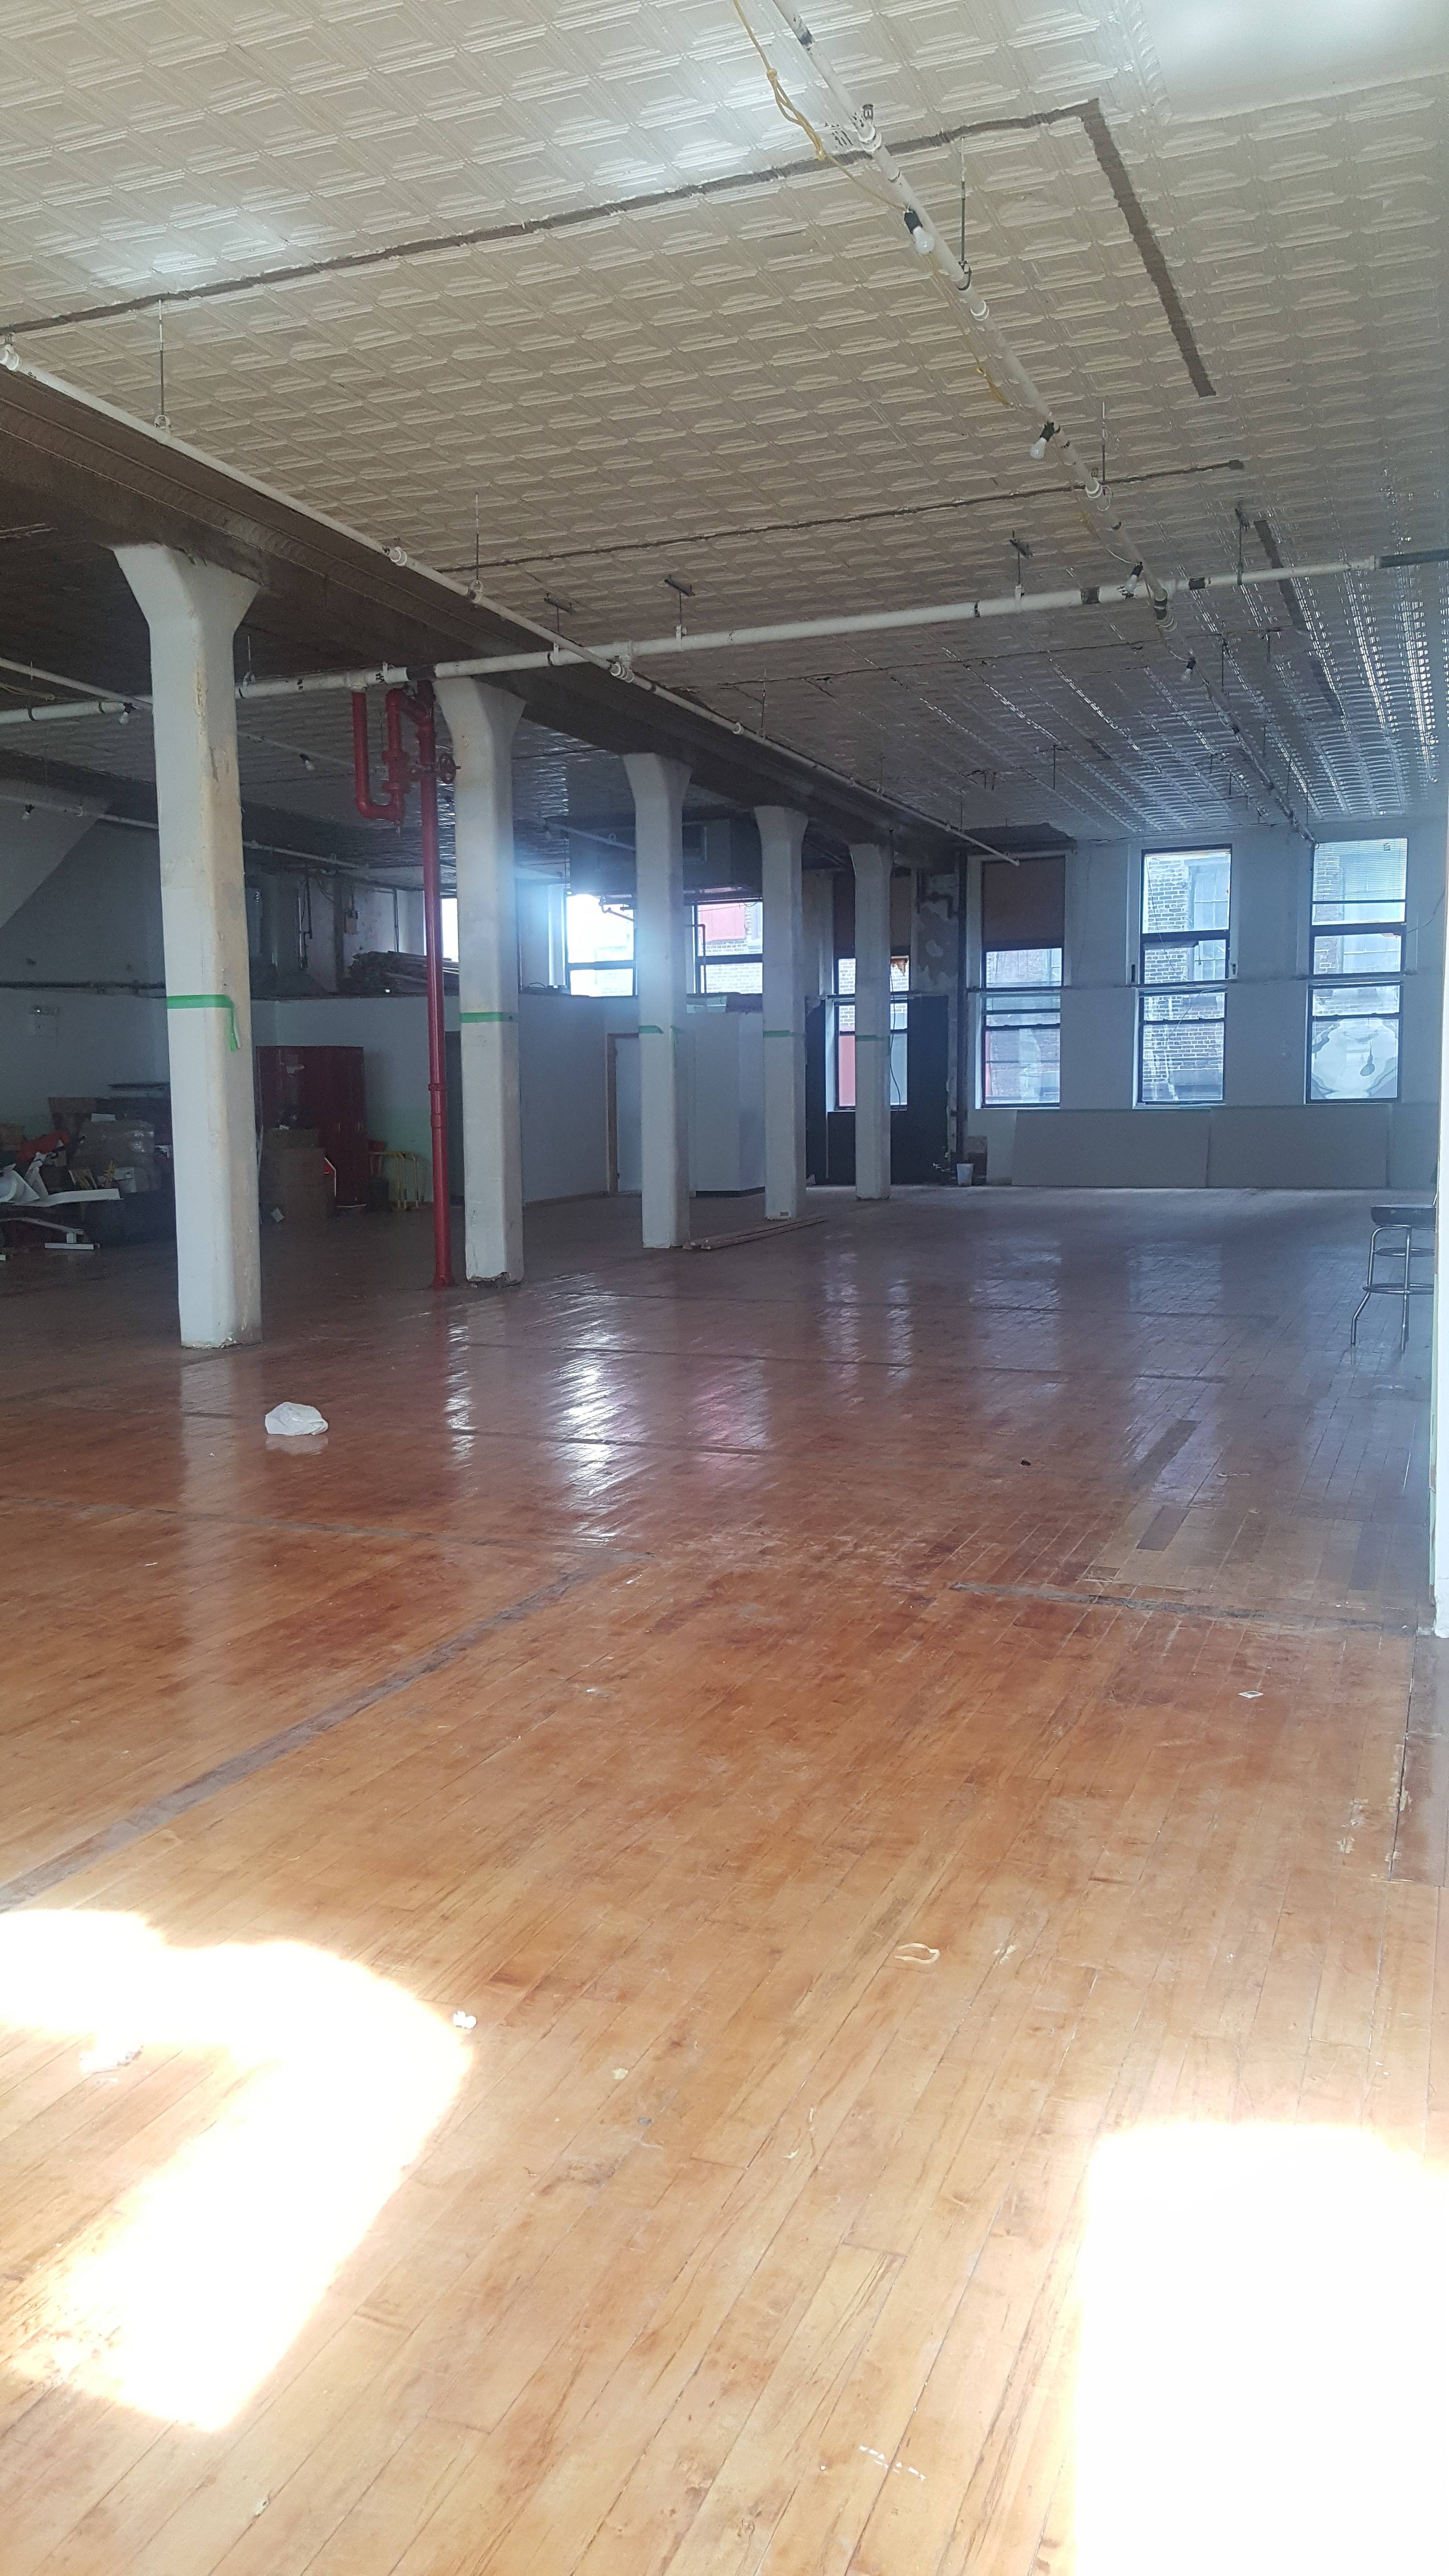 5,000 Sq Ft TriBeCa Open Loft Space for Commercial Use!  Ideal for high end Showroom use & MORE!!